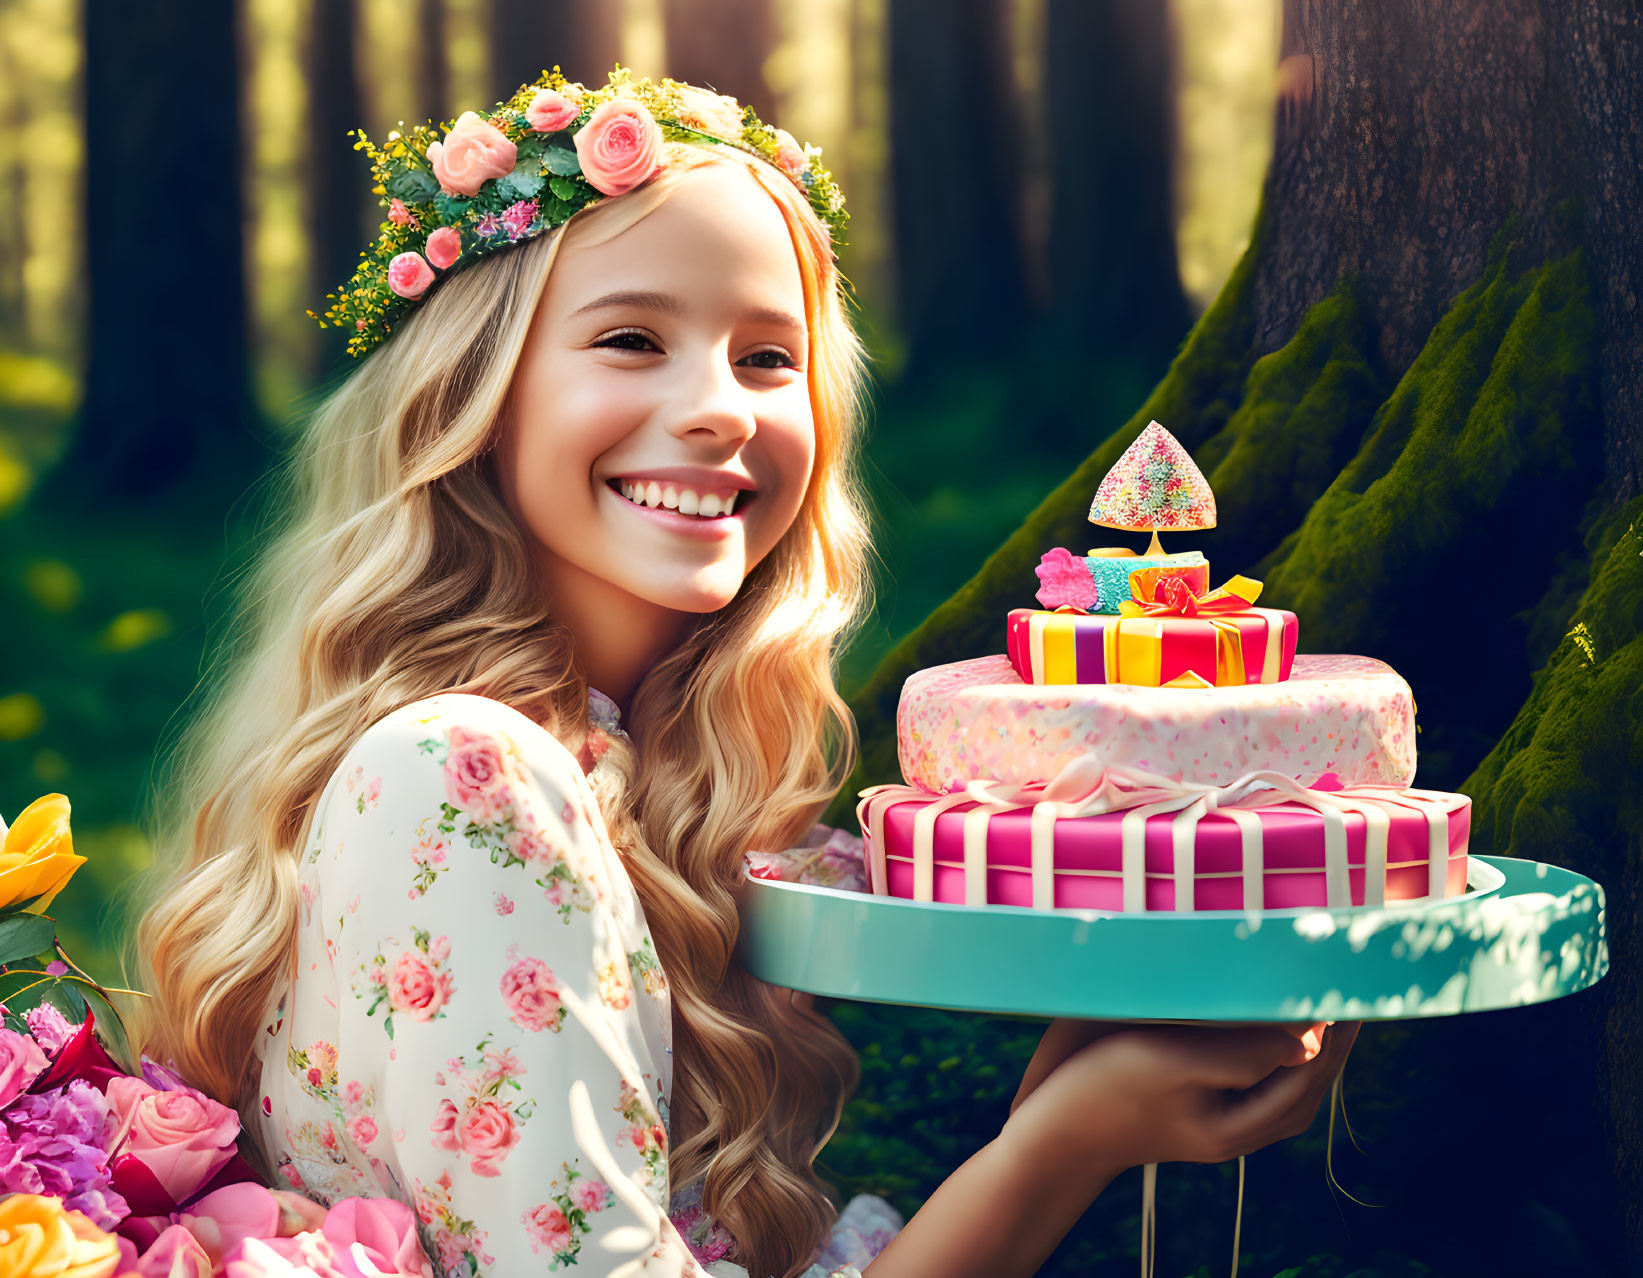 Smiling girl with floral crown and whimsical birthday cake in sunlit forest